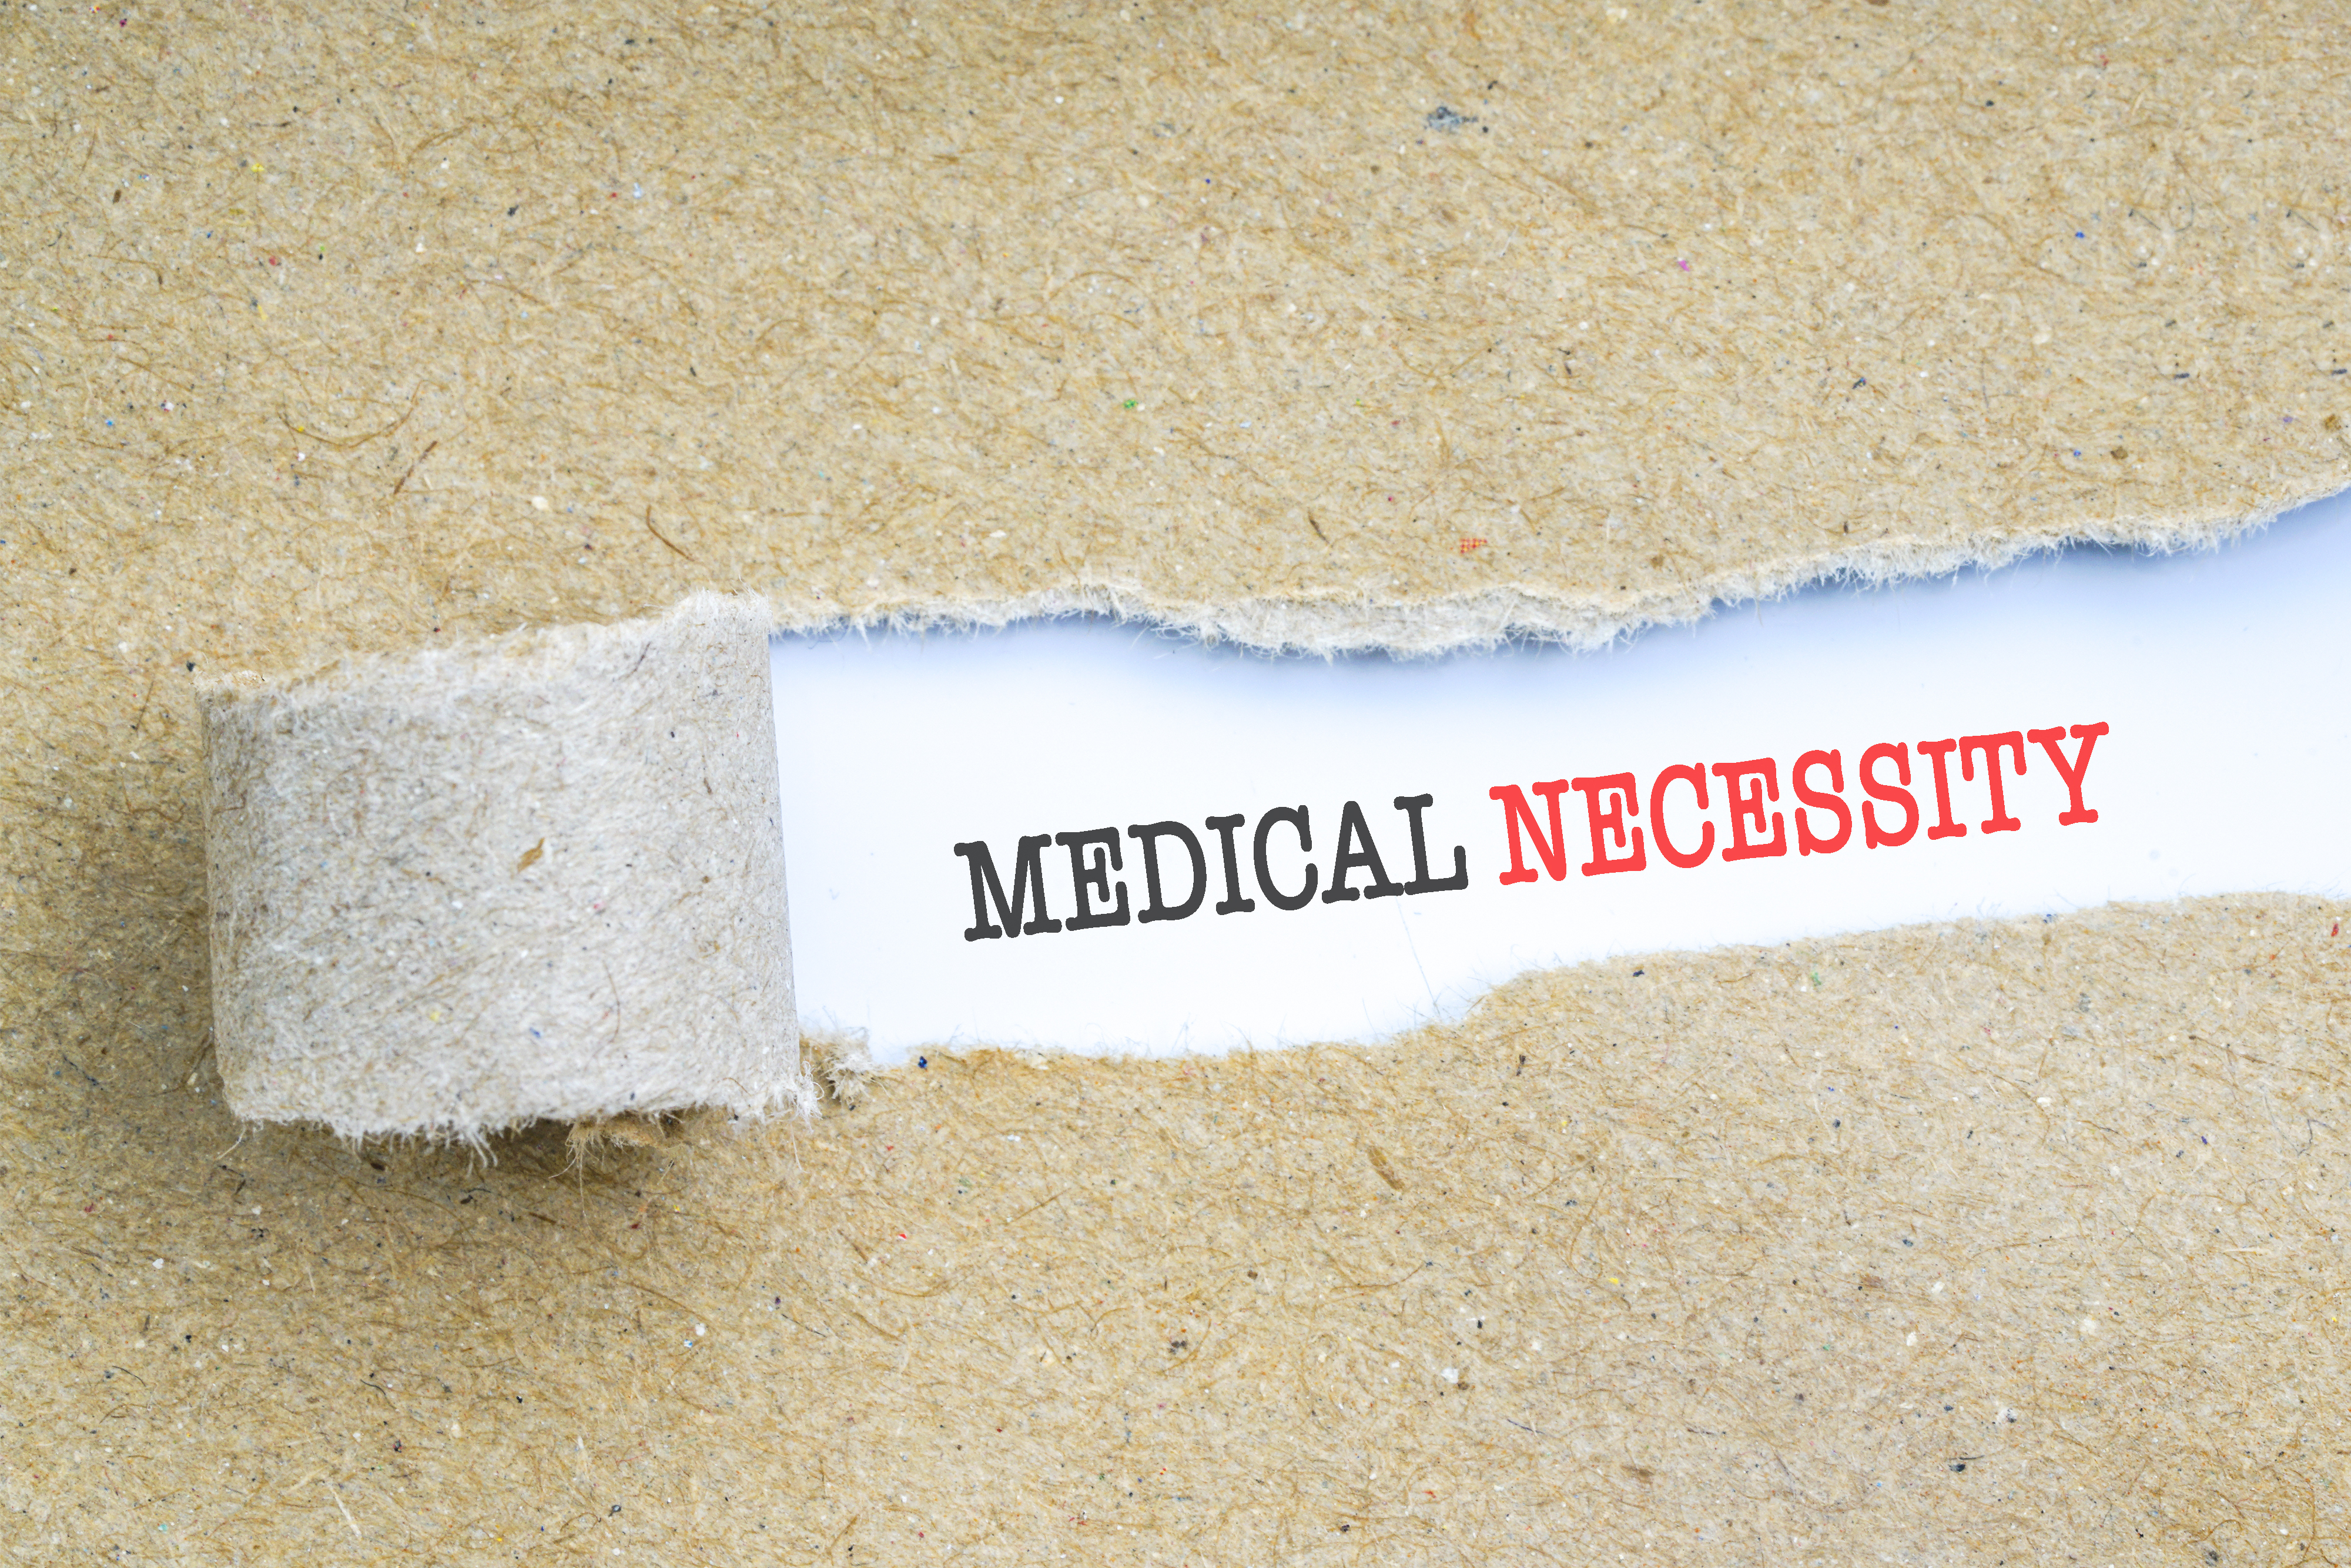 Peeling back the layers of "medical necessity"